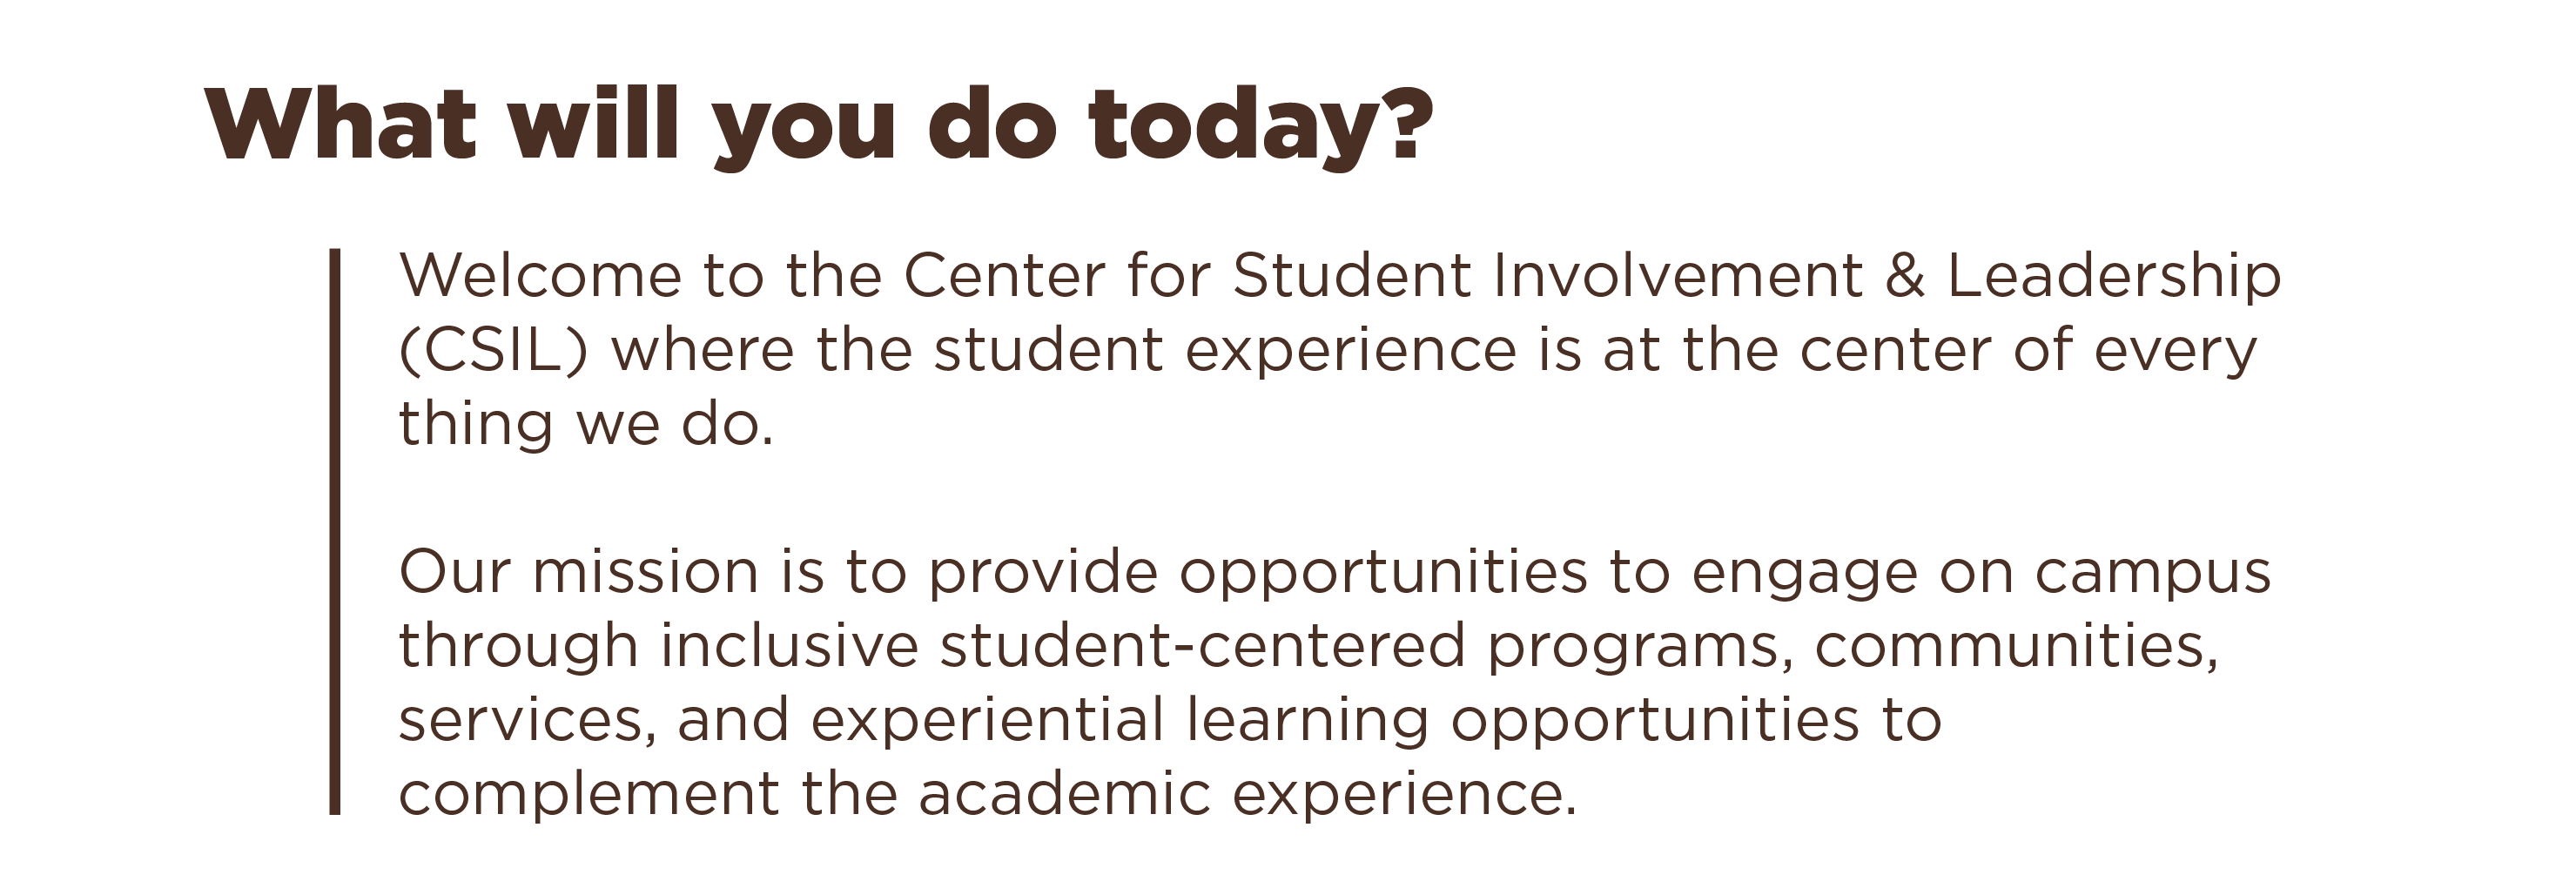 What will you do today? Welcome to the Center for Student Involvement & Leadership (CSIL) where the student experience is at the center of every thing we do. Our mission is to provide opportunities to engage on campus through inclusive student-centered programs, communities, services, and experiential learning opportunities to complement the academic experience.